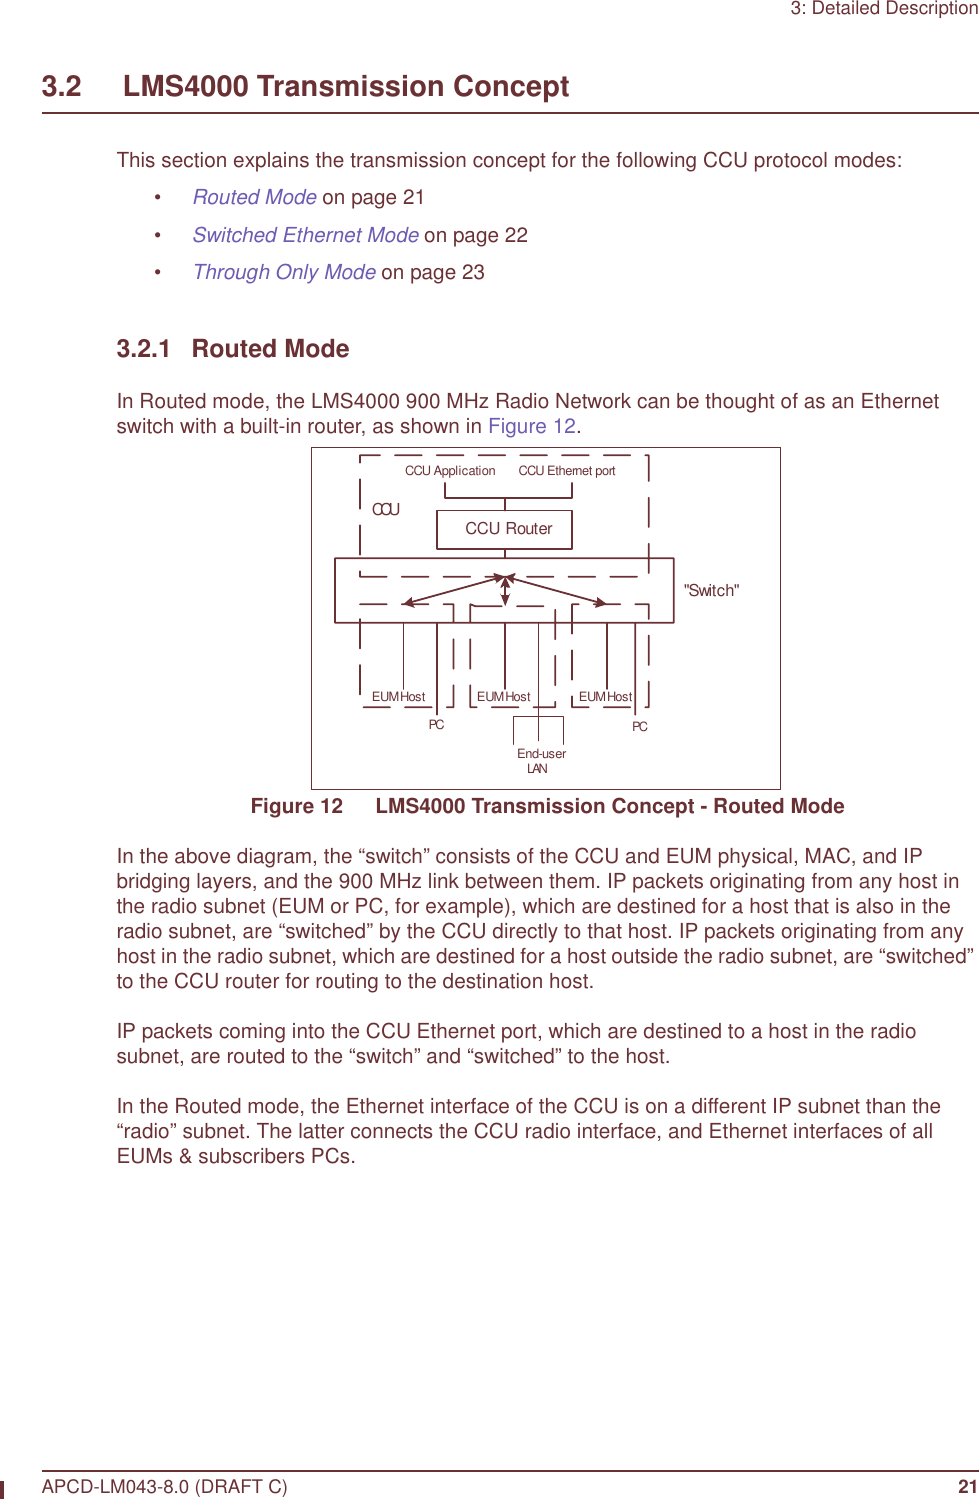 3: Detailed DescriptionAPCD-LM043-8.0 (DRAFT C) 213.2     LMS4000 Transmission ConceptThis section explains the transmission concept for the following CCU protocol modes:•Routed Mode on page 21•Switched Ethernet Mode on page 22•Through Only Mode on page 233.2.1 Routed ModeIn Routed mode, the LMS4000 900 MHz Radio Network can be thought of as an Ethernet switch with a built-in router, as shown in Figure 12.Figure 12   LMS4000 Transmission Concept - Routed ModeIn the above diagram, the “switch” consists of the CCU and EUM physical, MAC, and IP bridging layers, and the 900 MHz link between them. IP packets originating from any host in the radio subnet (EUM or PC, for example), which are destined for a host that is also in the radio subnet, are “switched” by the CCU directly to that host. IP packets originating from any host in the radio subnet, which are destined for a host outside the radio subnet, are “switched” to the CCU router for routing to the destination host.IP packets coming into the CCU Ethernet port, which are destined to a host in the radio subnet, are routed to the “switch” and “switched” to the host.In the Routed mode, the Ethernet interface of the CCU is on a different IP subnet than the “radio” subnet. The latter connects the CCU radio interface, and Ethernet interfaces of all EUMs &amp; subscribers PCs.CCU RouterEUM HostPCEUM HostEnd-userLANPCEUM HostCCU Ethernet port&quot;Switch&quot;CCUCCU Application